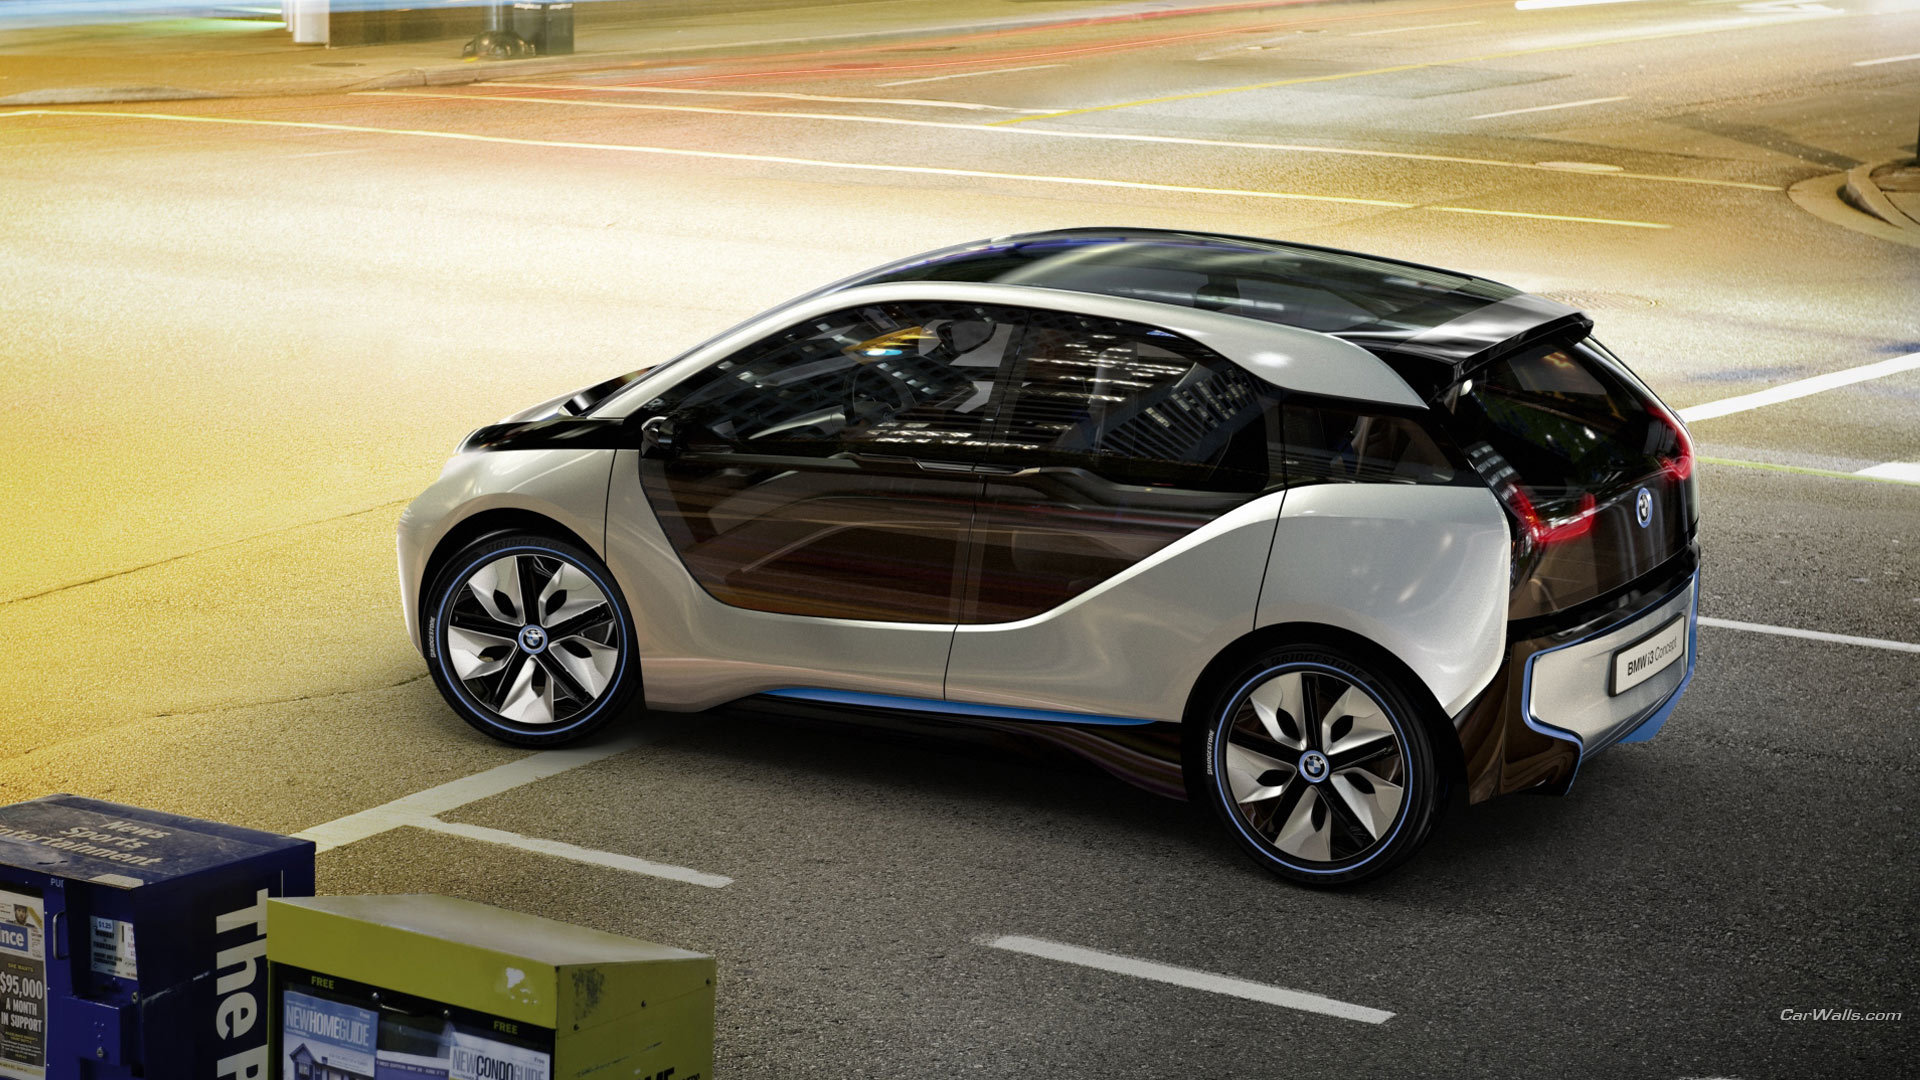 Awesome BMW I3 Concept free wallpaper ID:118536 for full hd 1920x1080 desktop